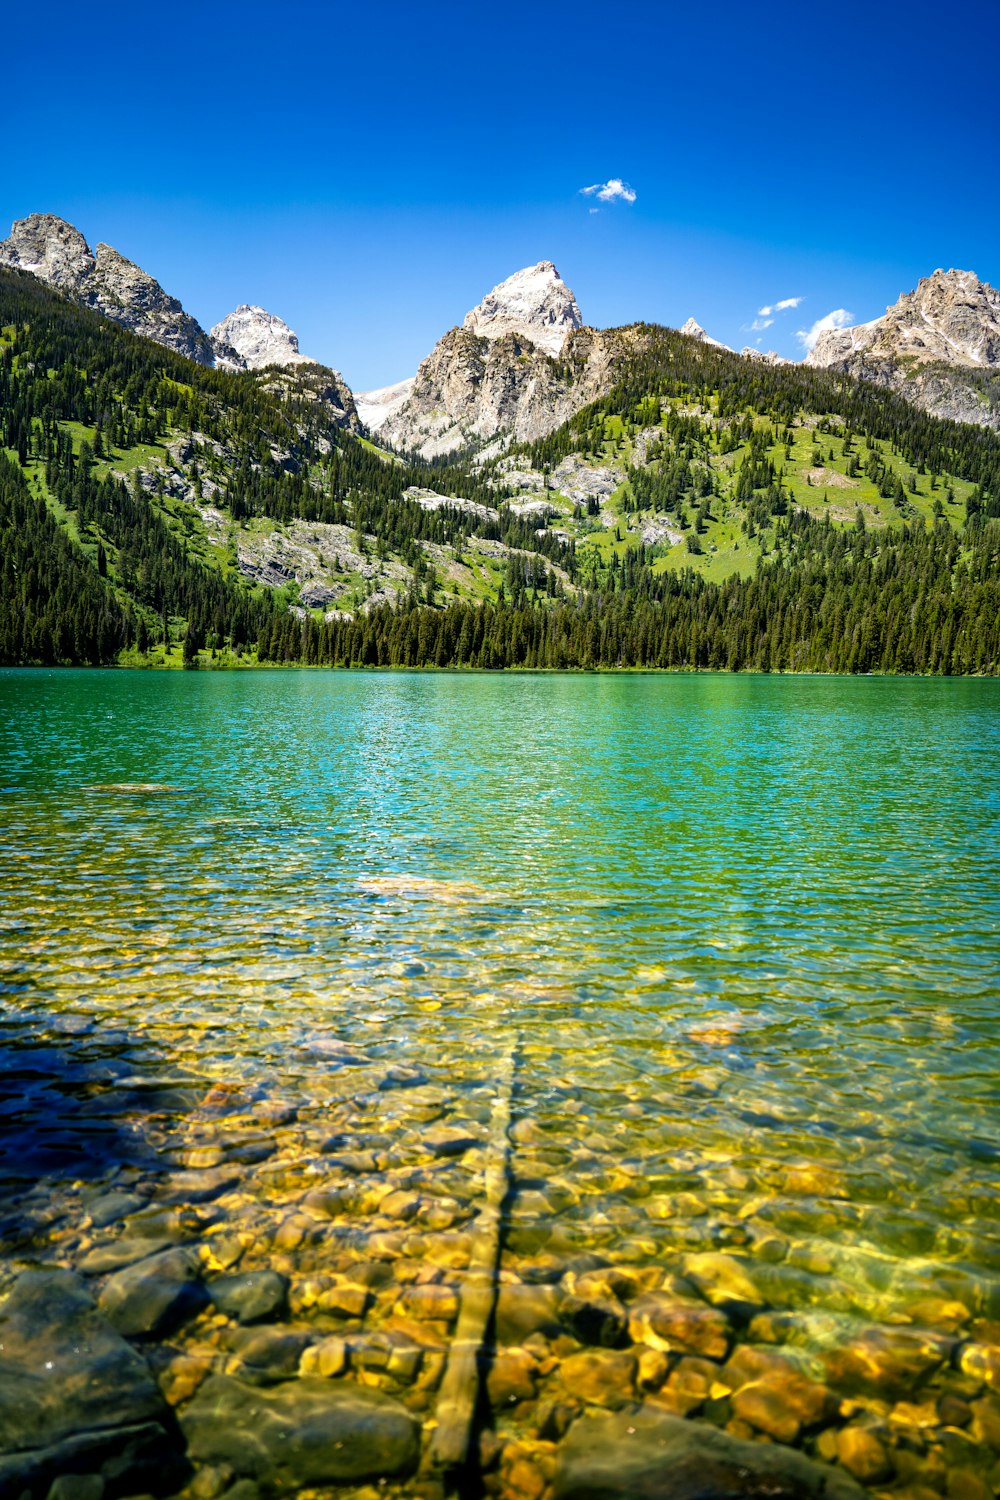 a lake surrounded by mountains with rocks in the water